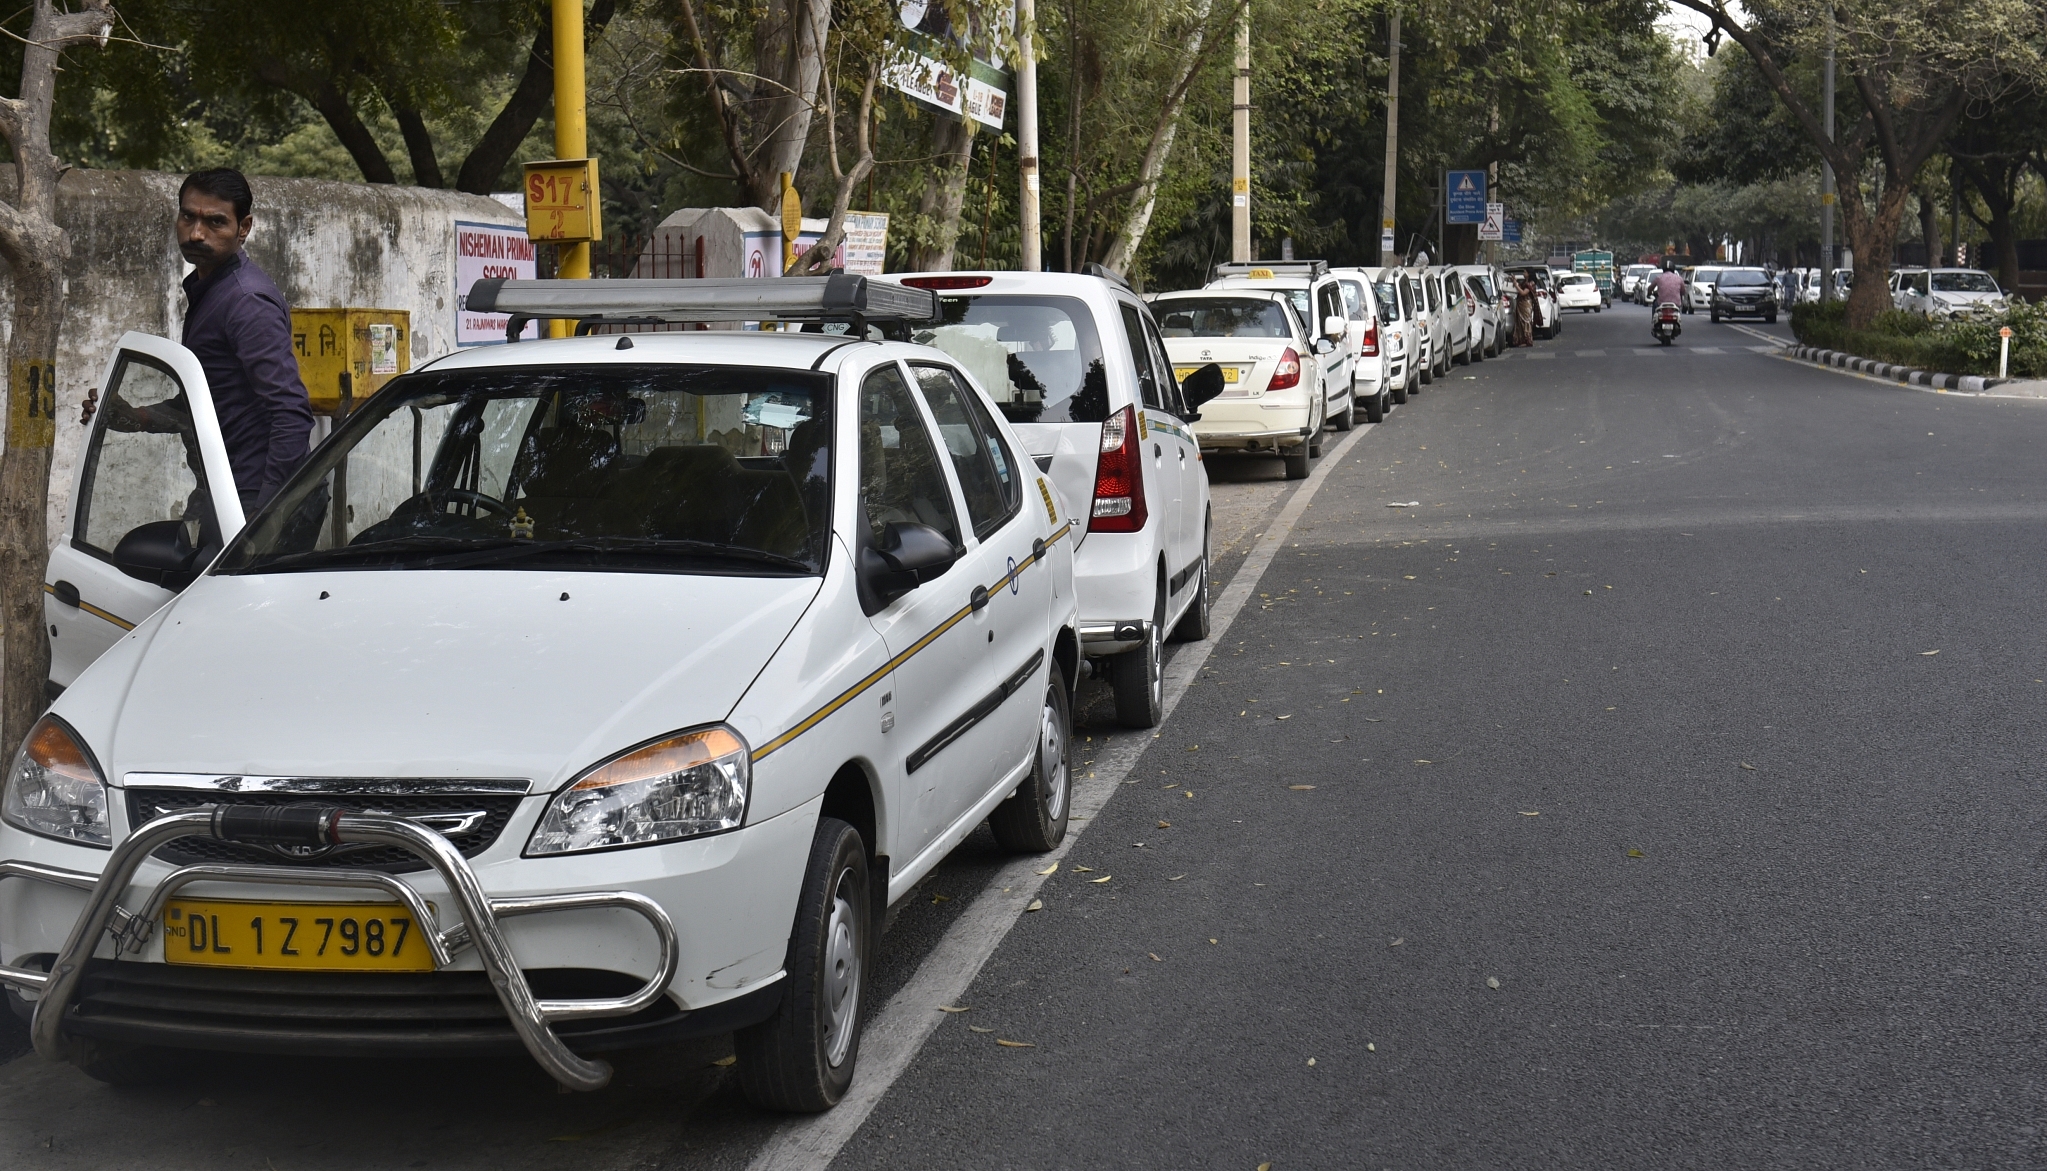 Ola and Uber Cabs in Delhi (Sushil Kumar/Hindustan Times via Getty Images)